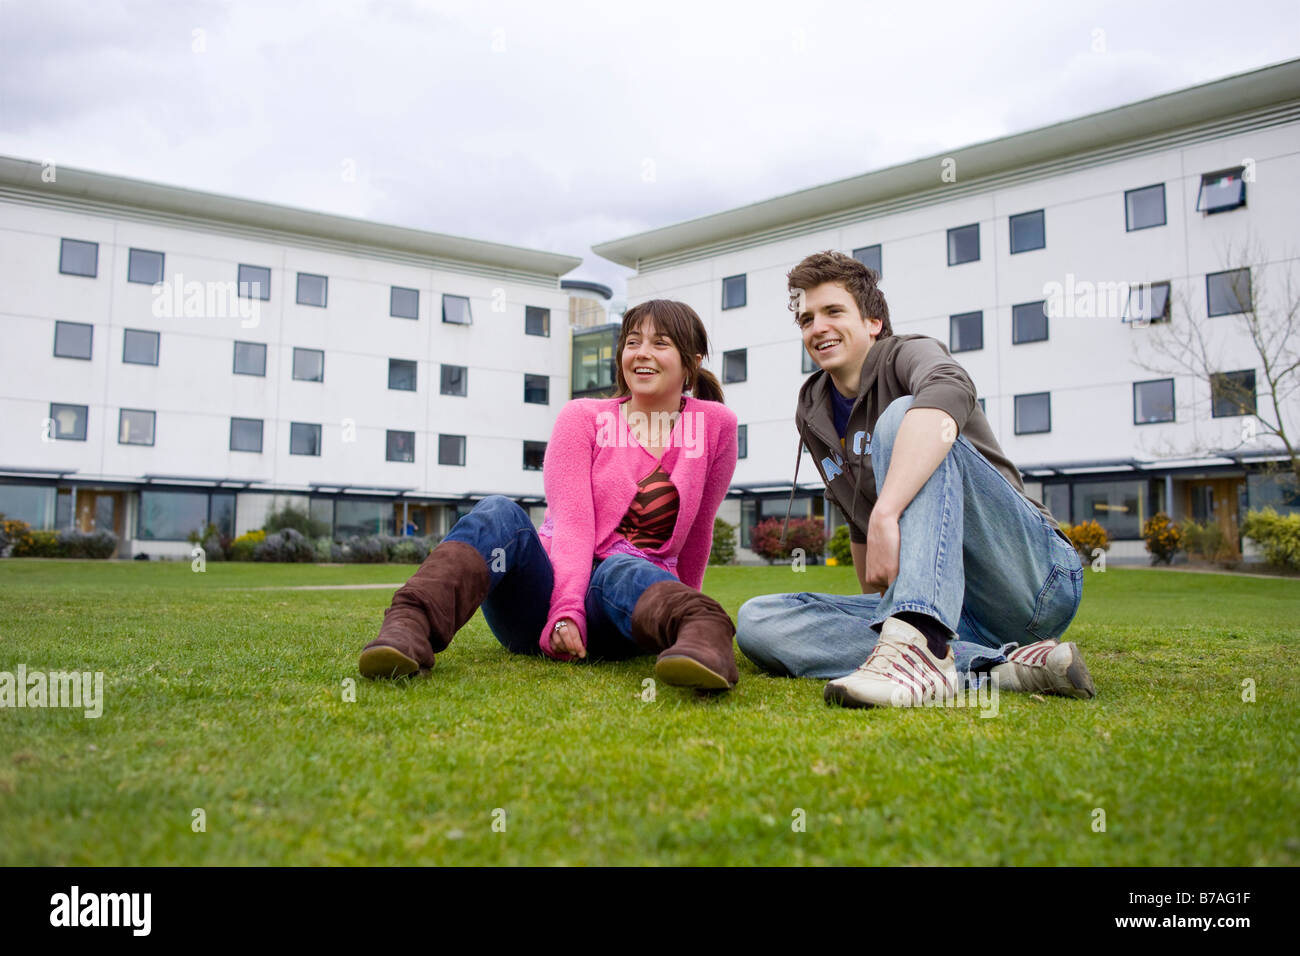 Two students at breaktime having a friendly chat on the grass outside the university building Stock Photo